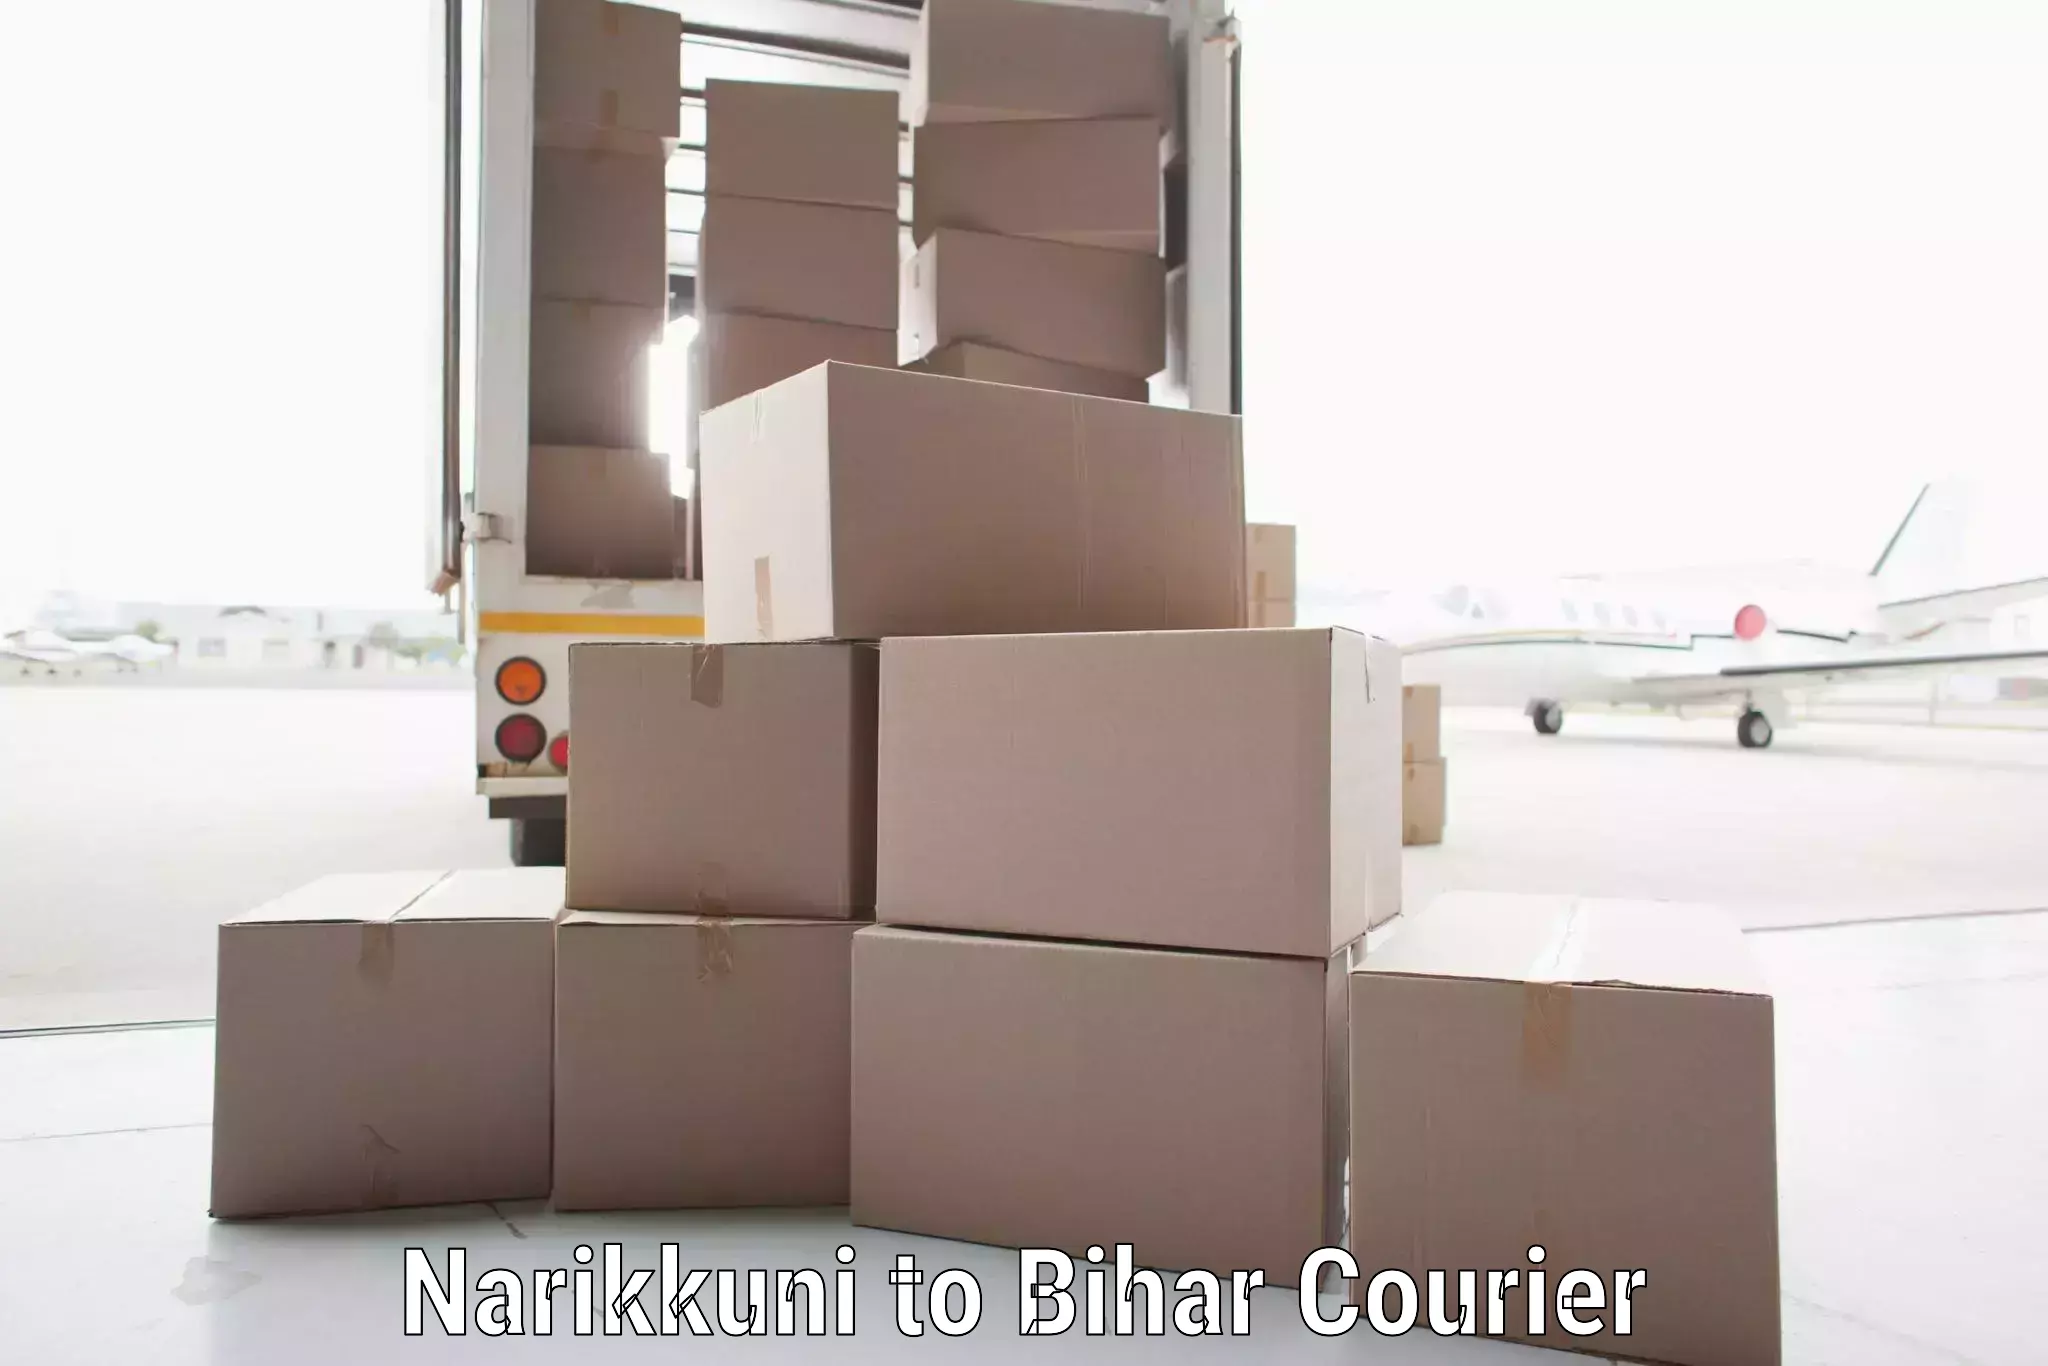 Next-day delivery options Narikkuni to Fatwah